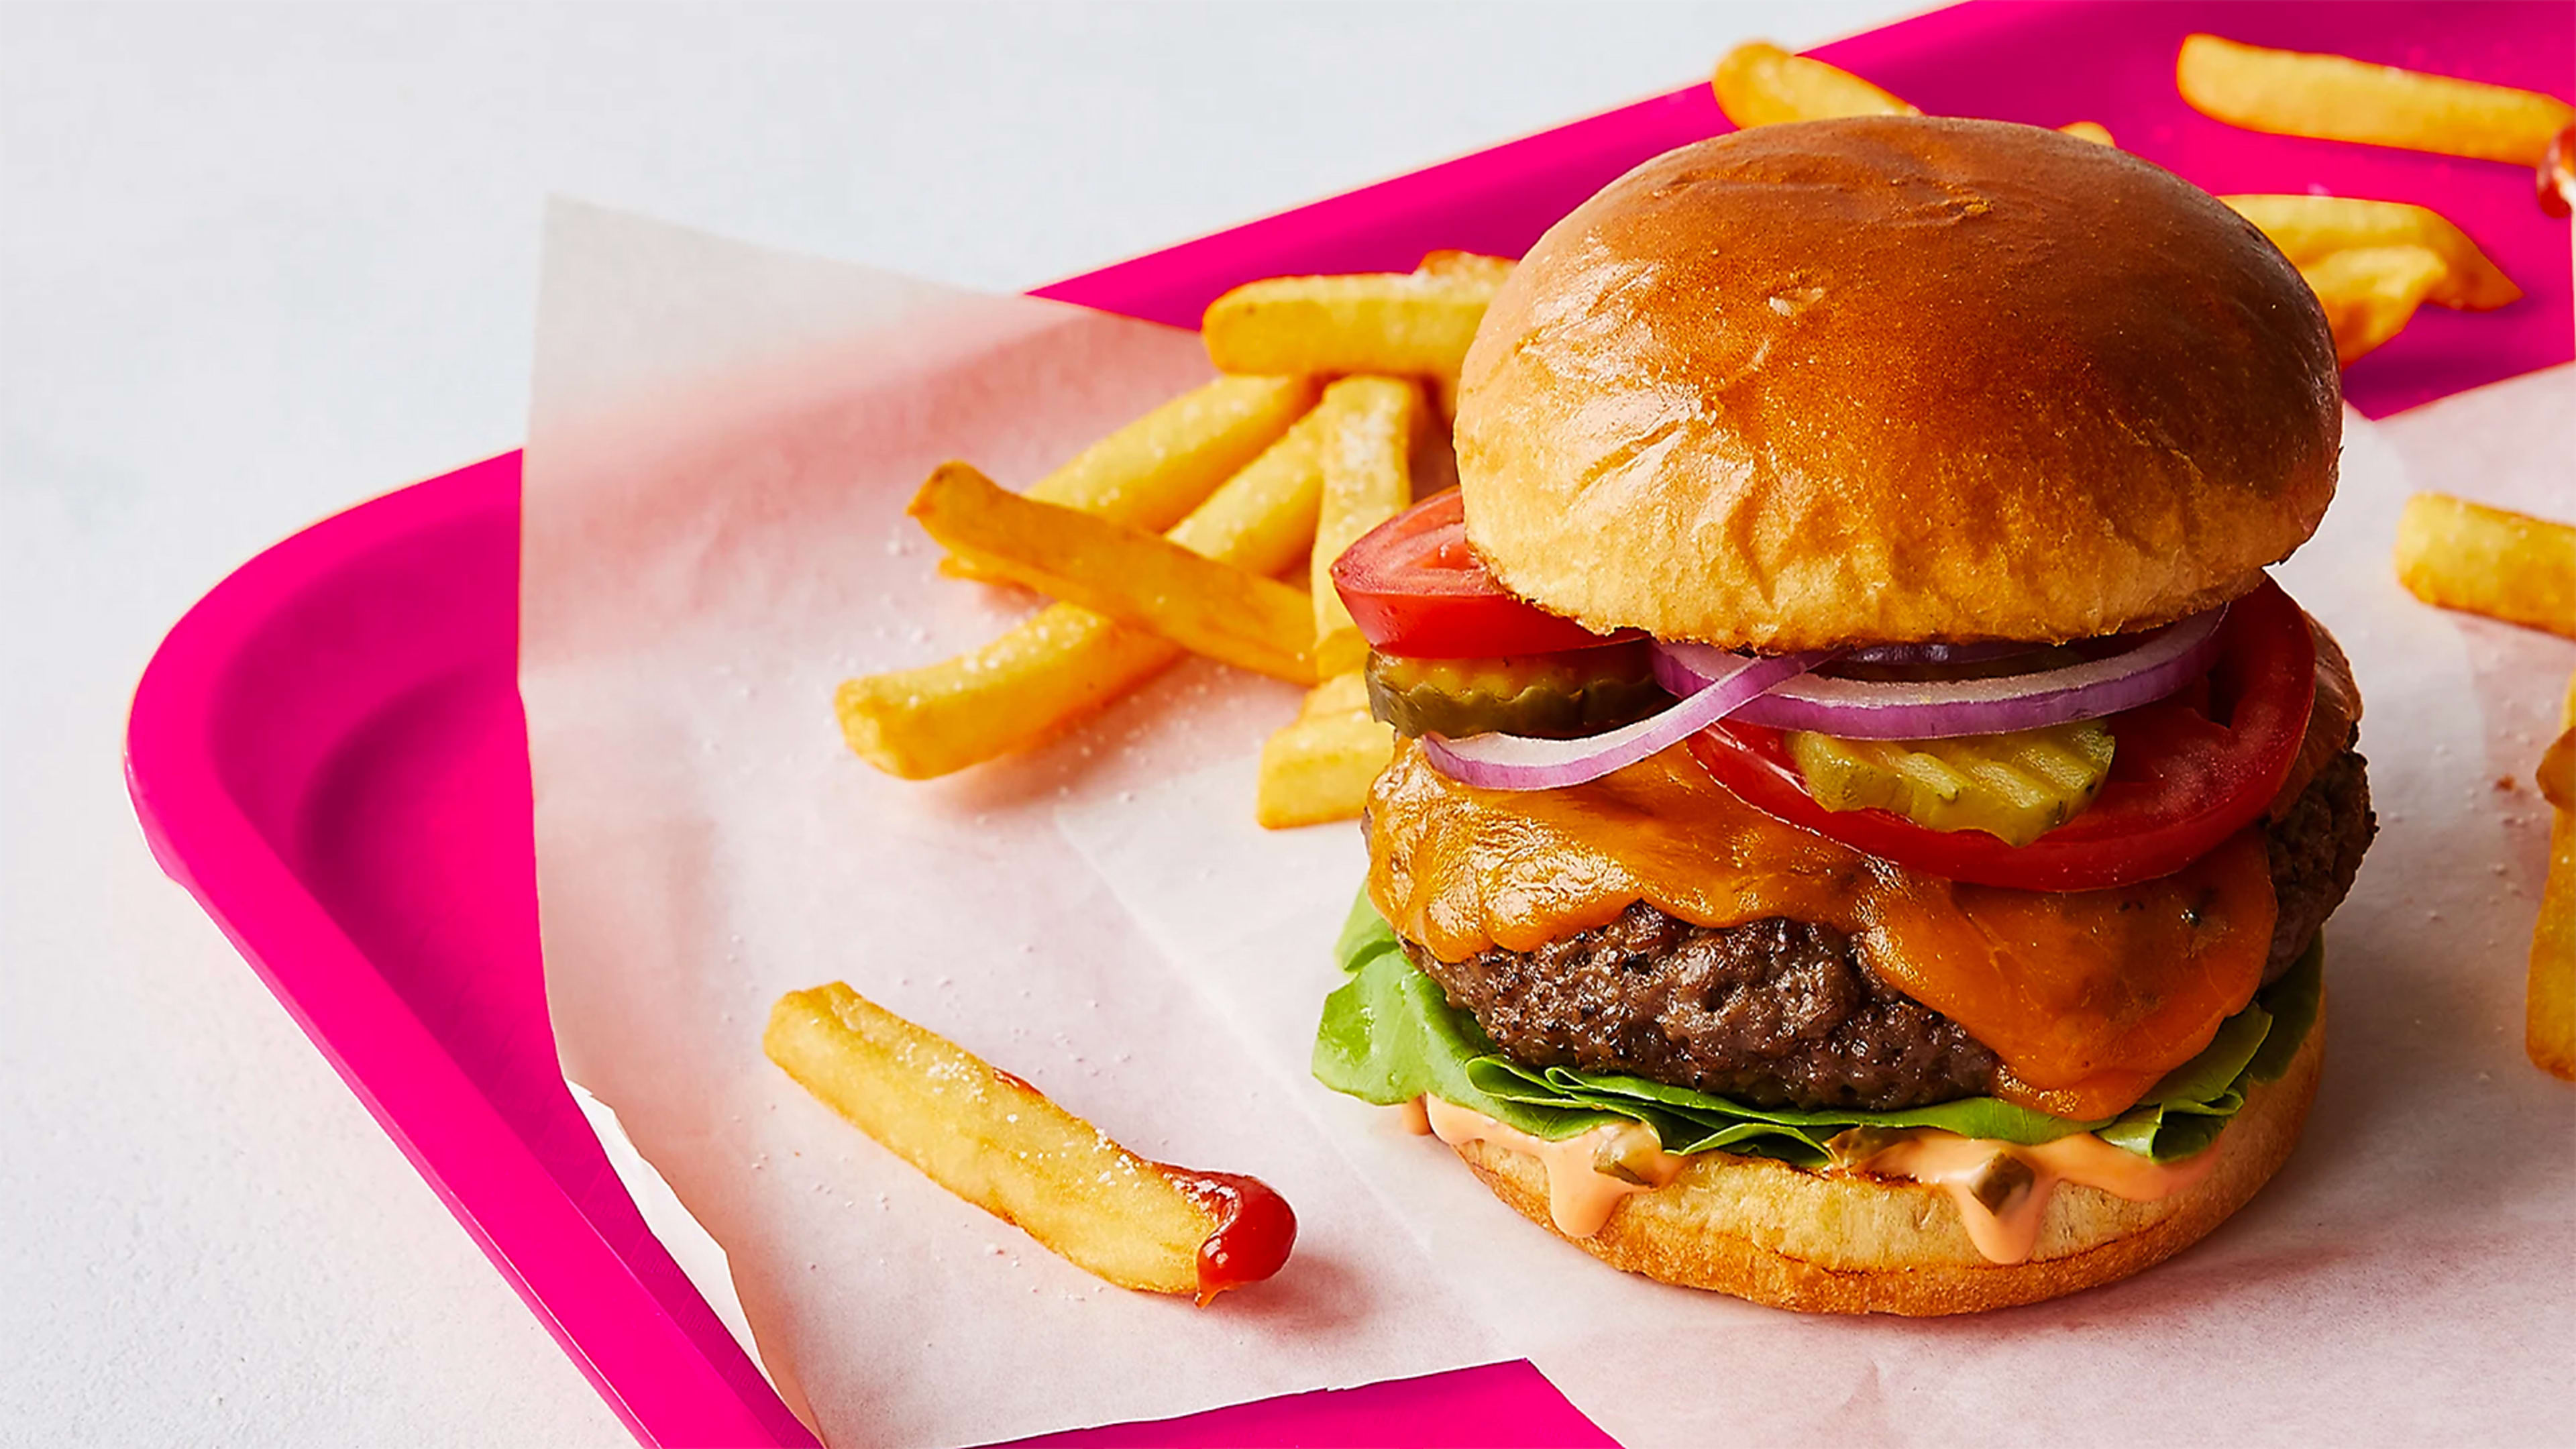 Taste alone won’t persuade Americans to swap out beef for plant-based burgers